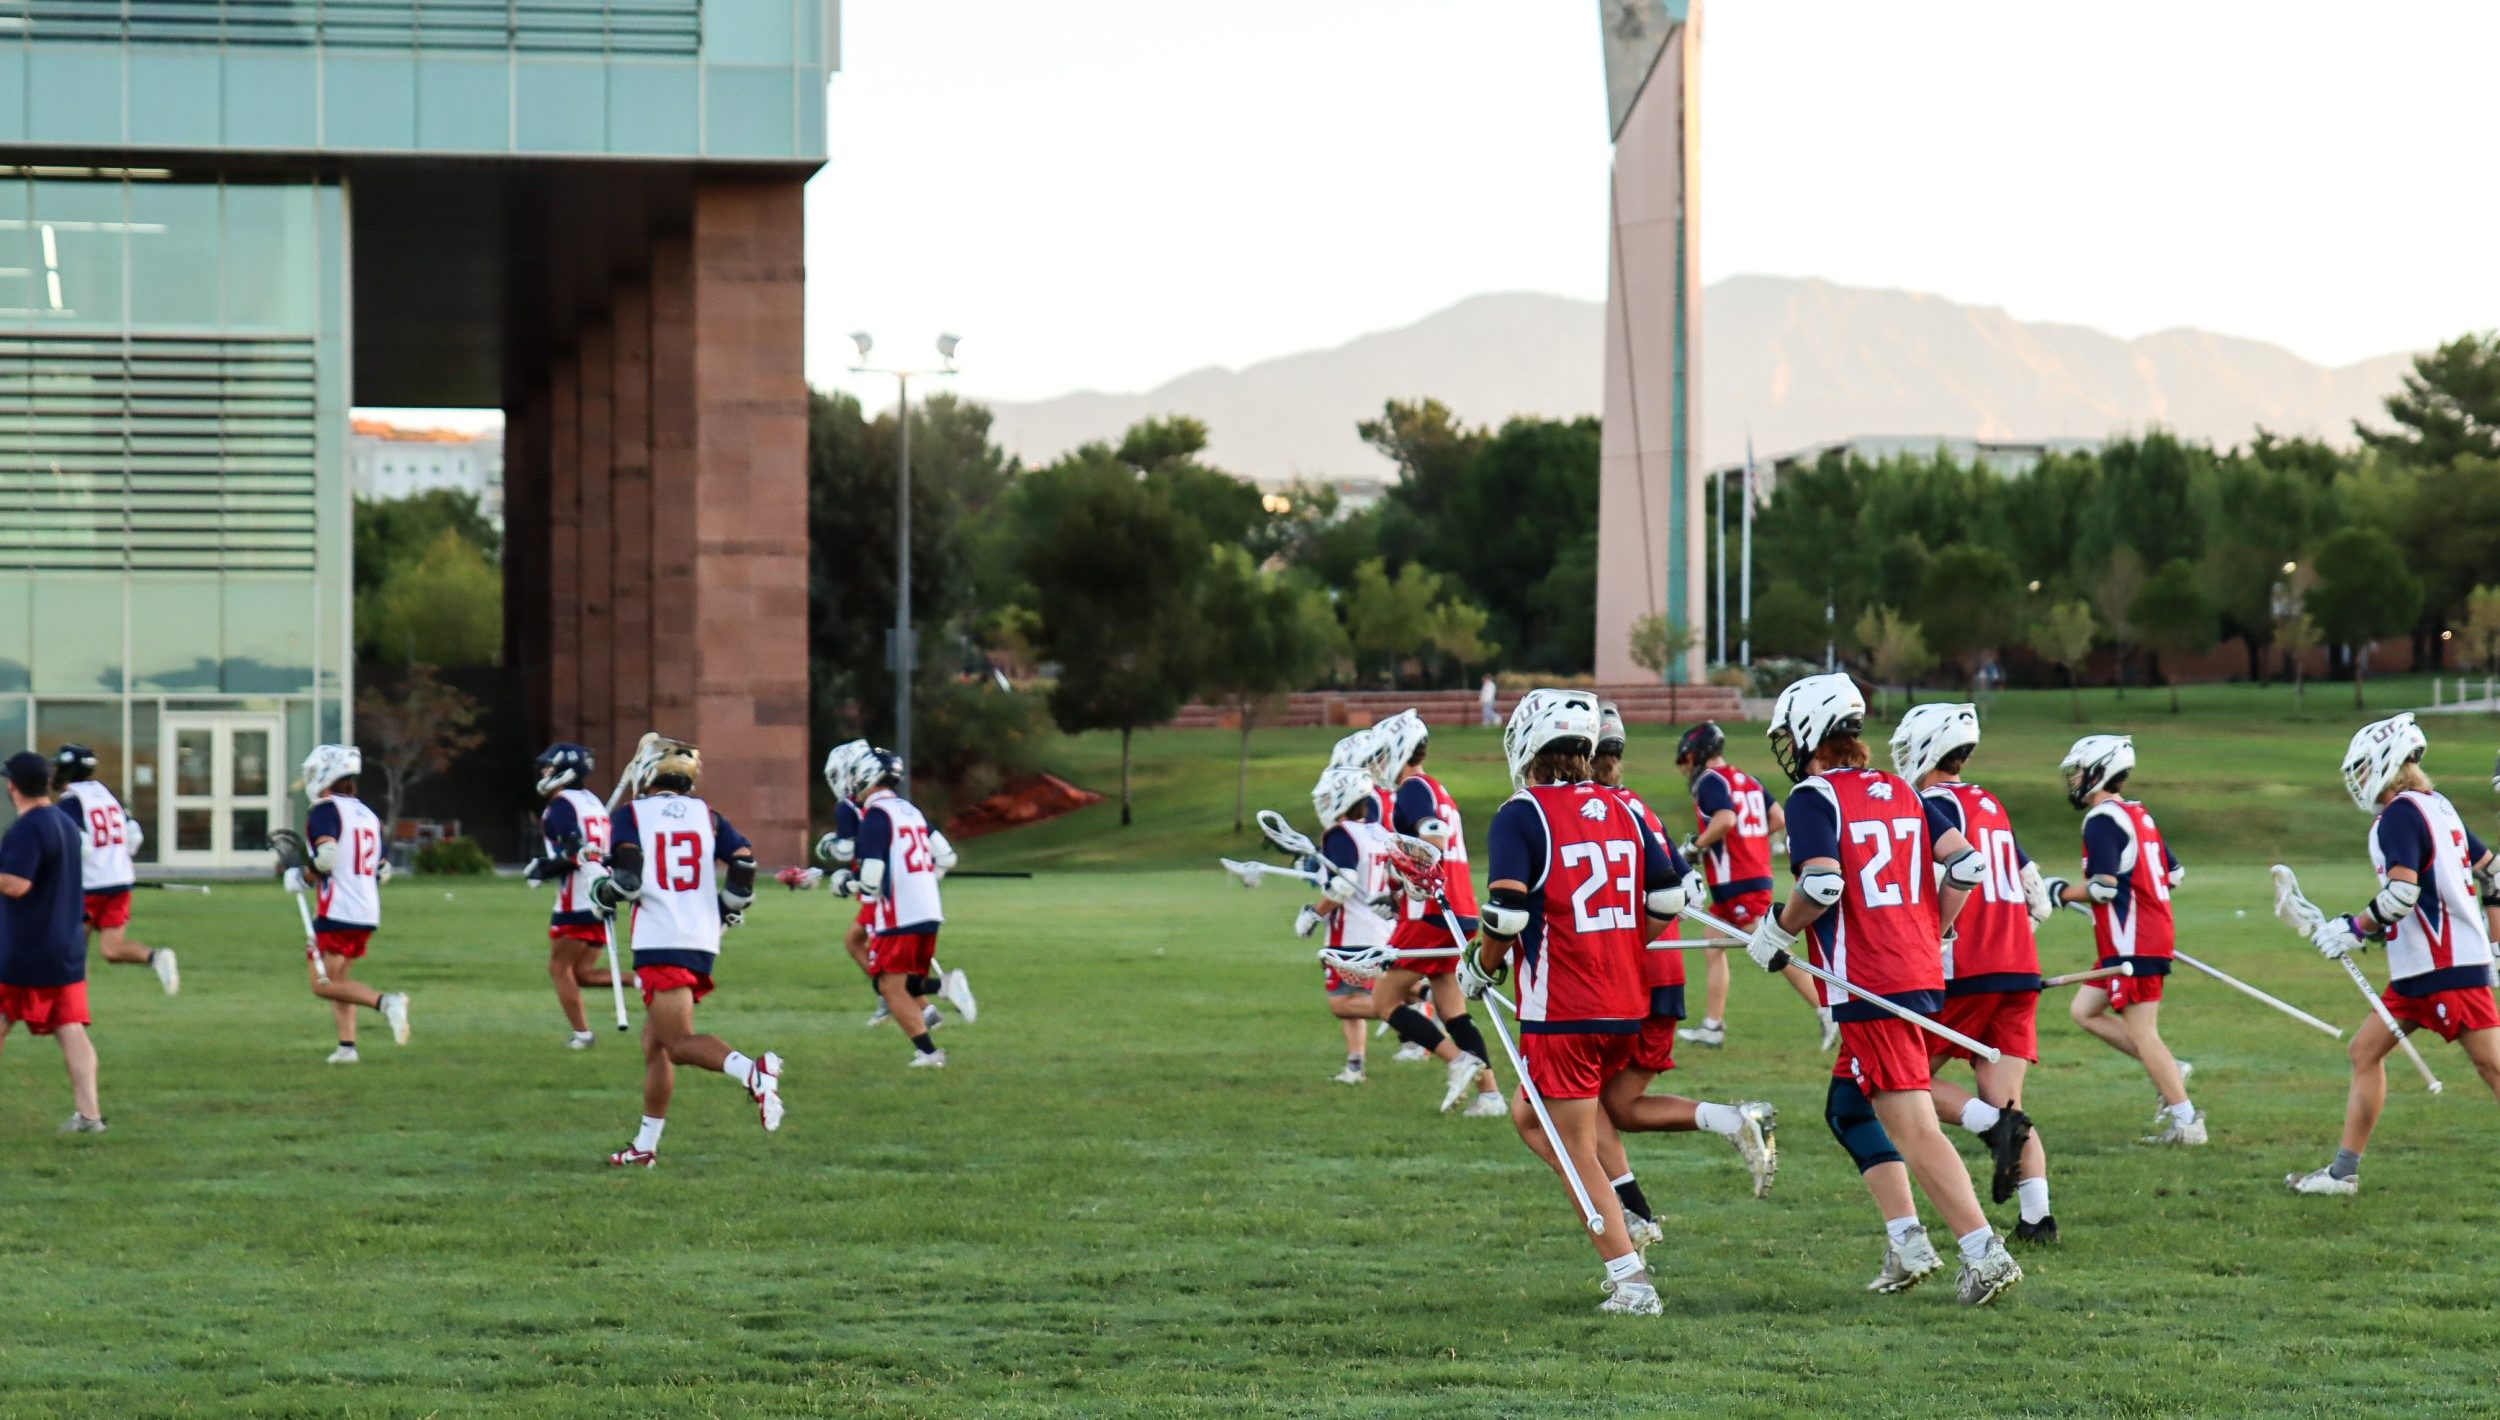 Utah Tech men’s lacrosse steps up to elevated level of competition in Division I